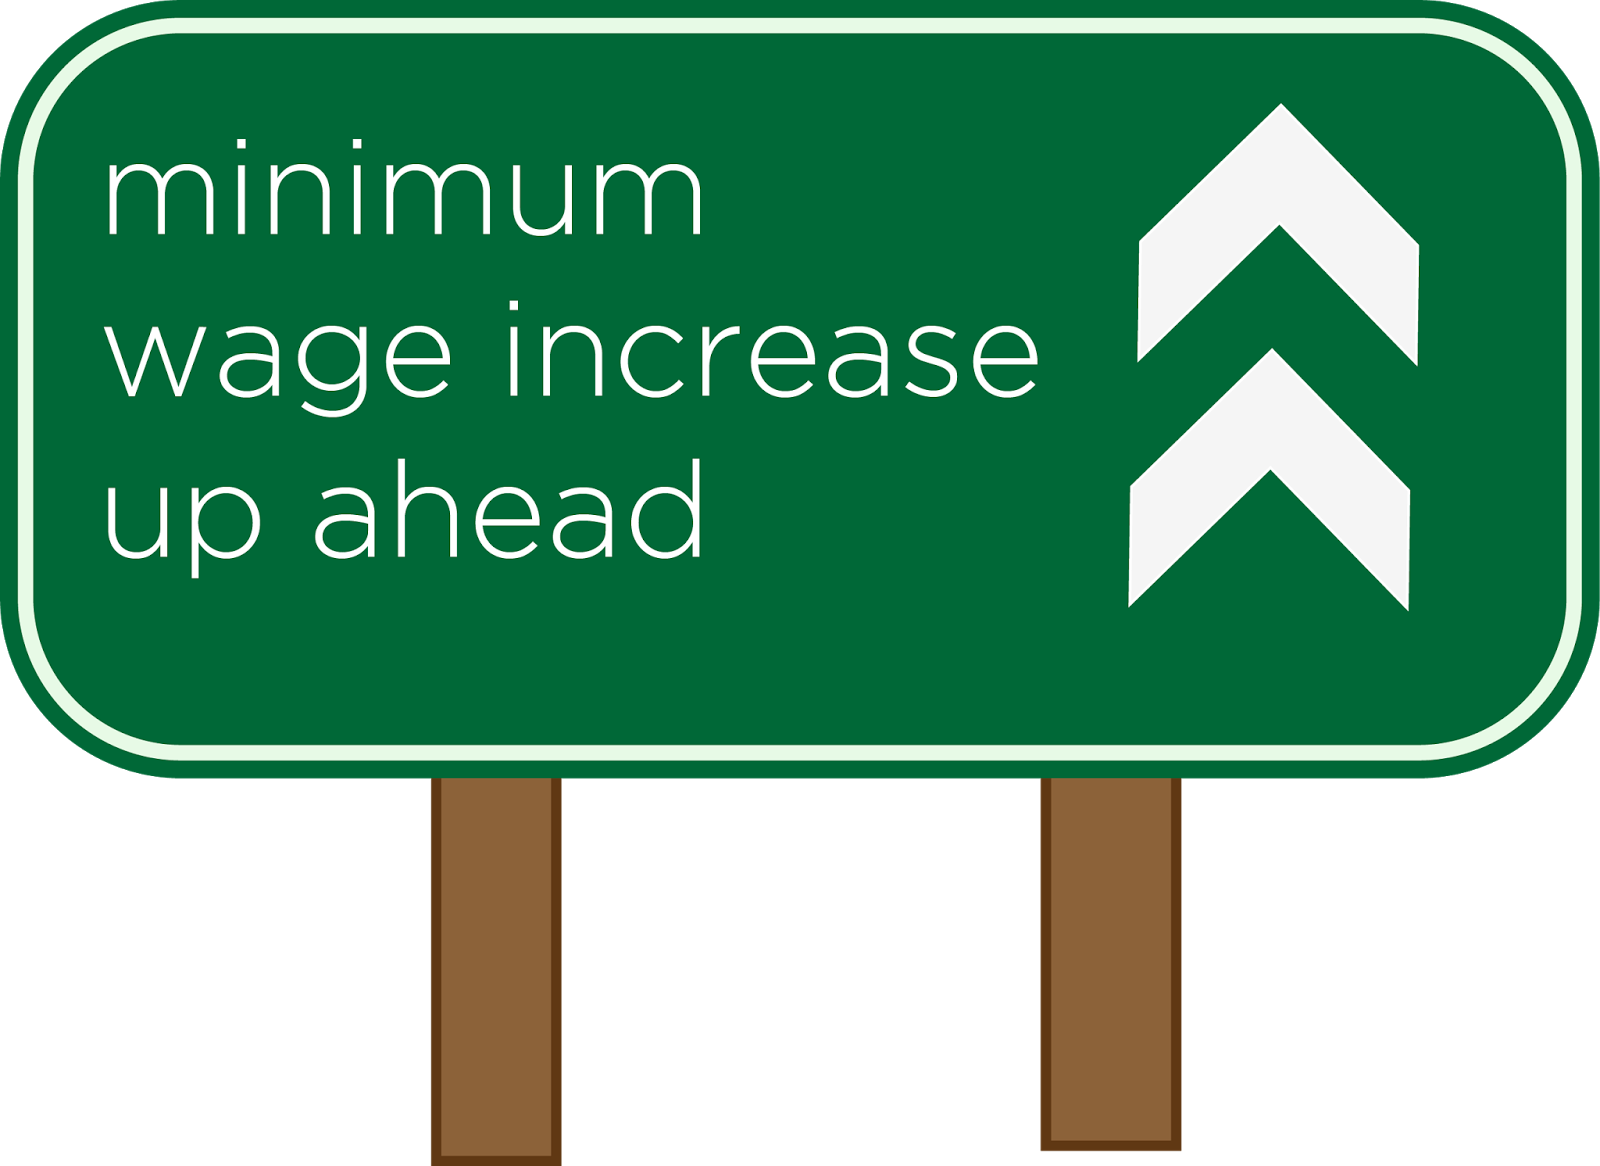 Prepare Your Business For The Minimum Wage Increase - Ontario Minimum Wage Increase (1600x1166)